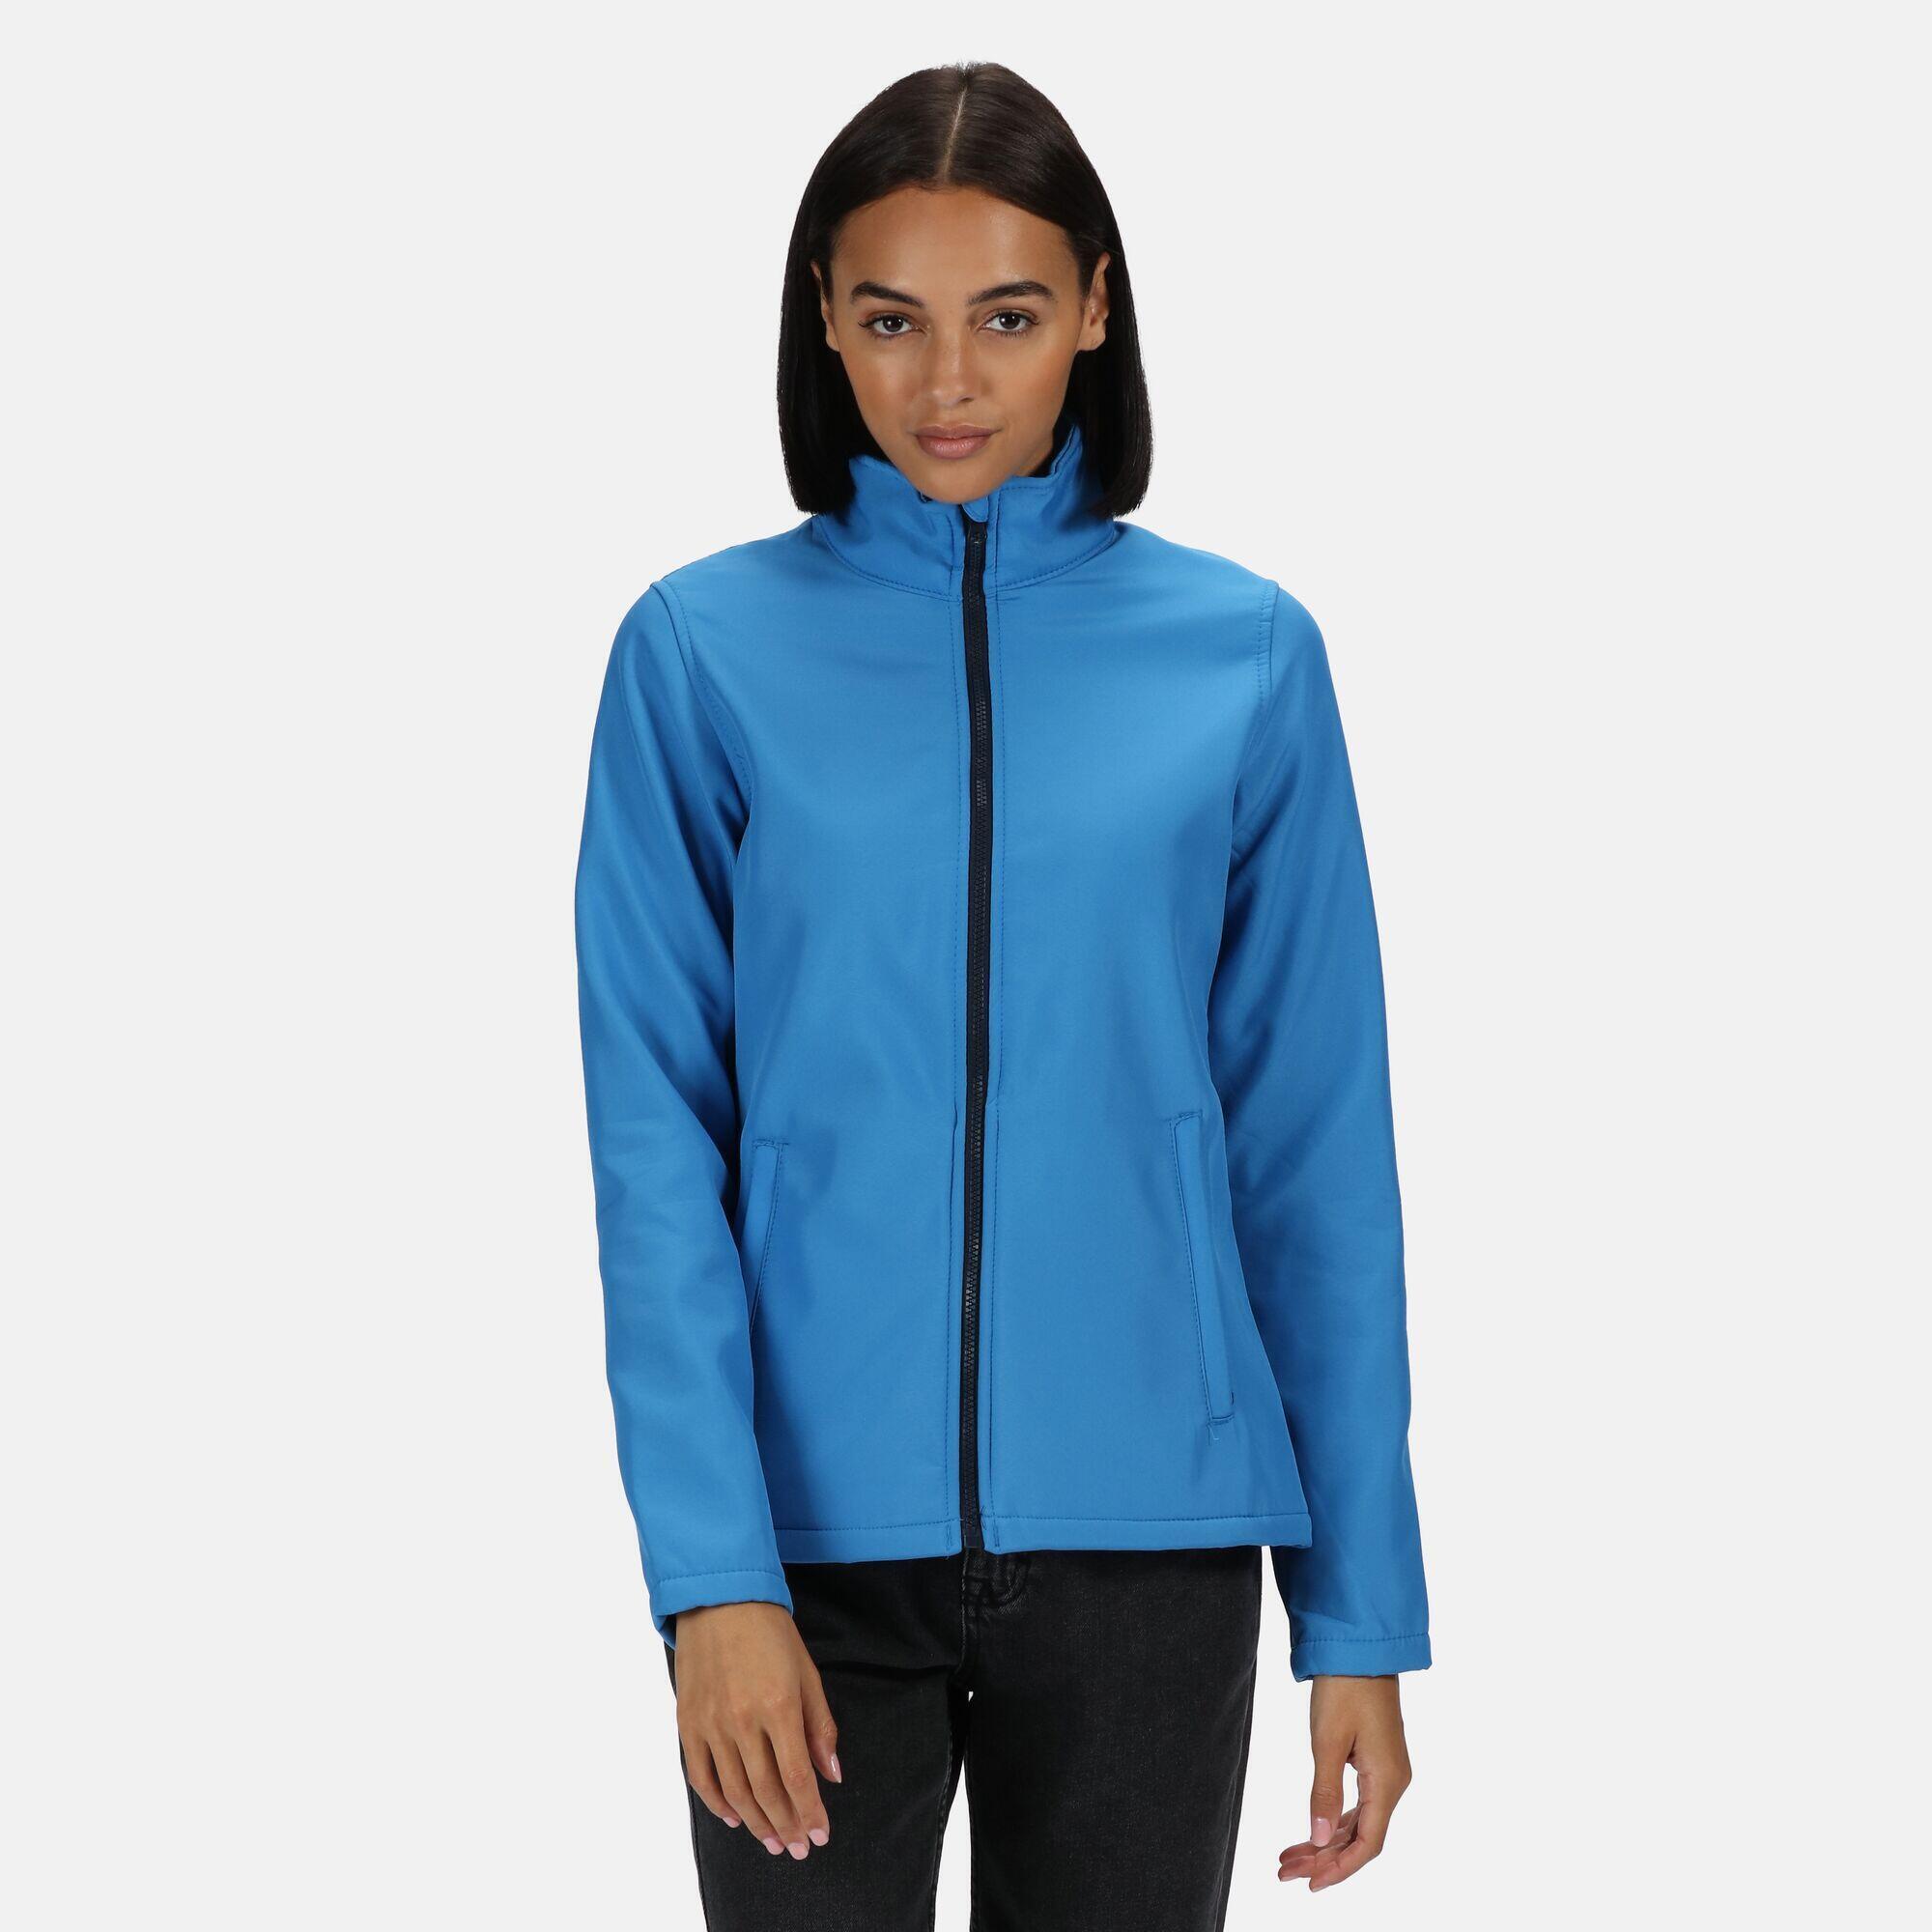 Standout Womens/Ladies Ablaze Printable Soft Shell Jacket (French Blue/Navy) 4/5